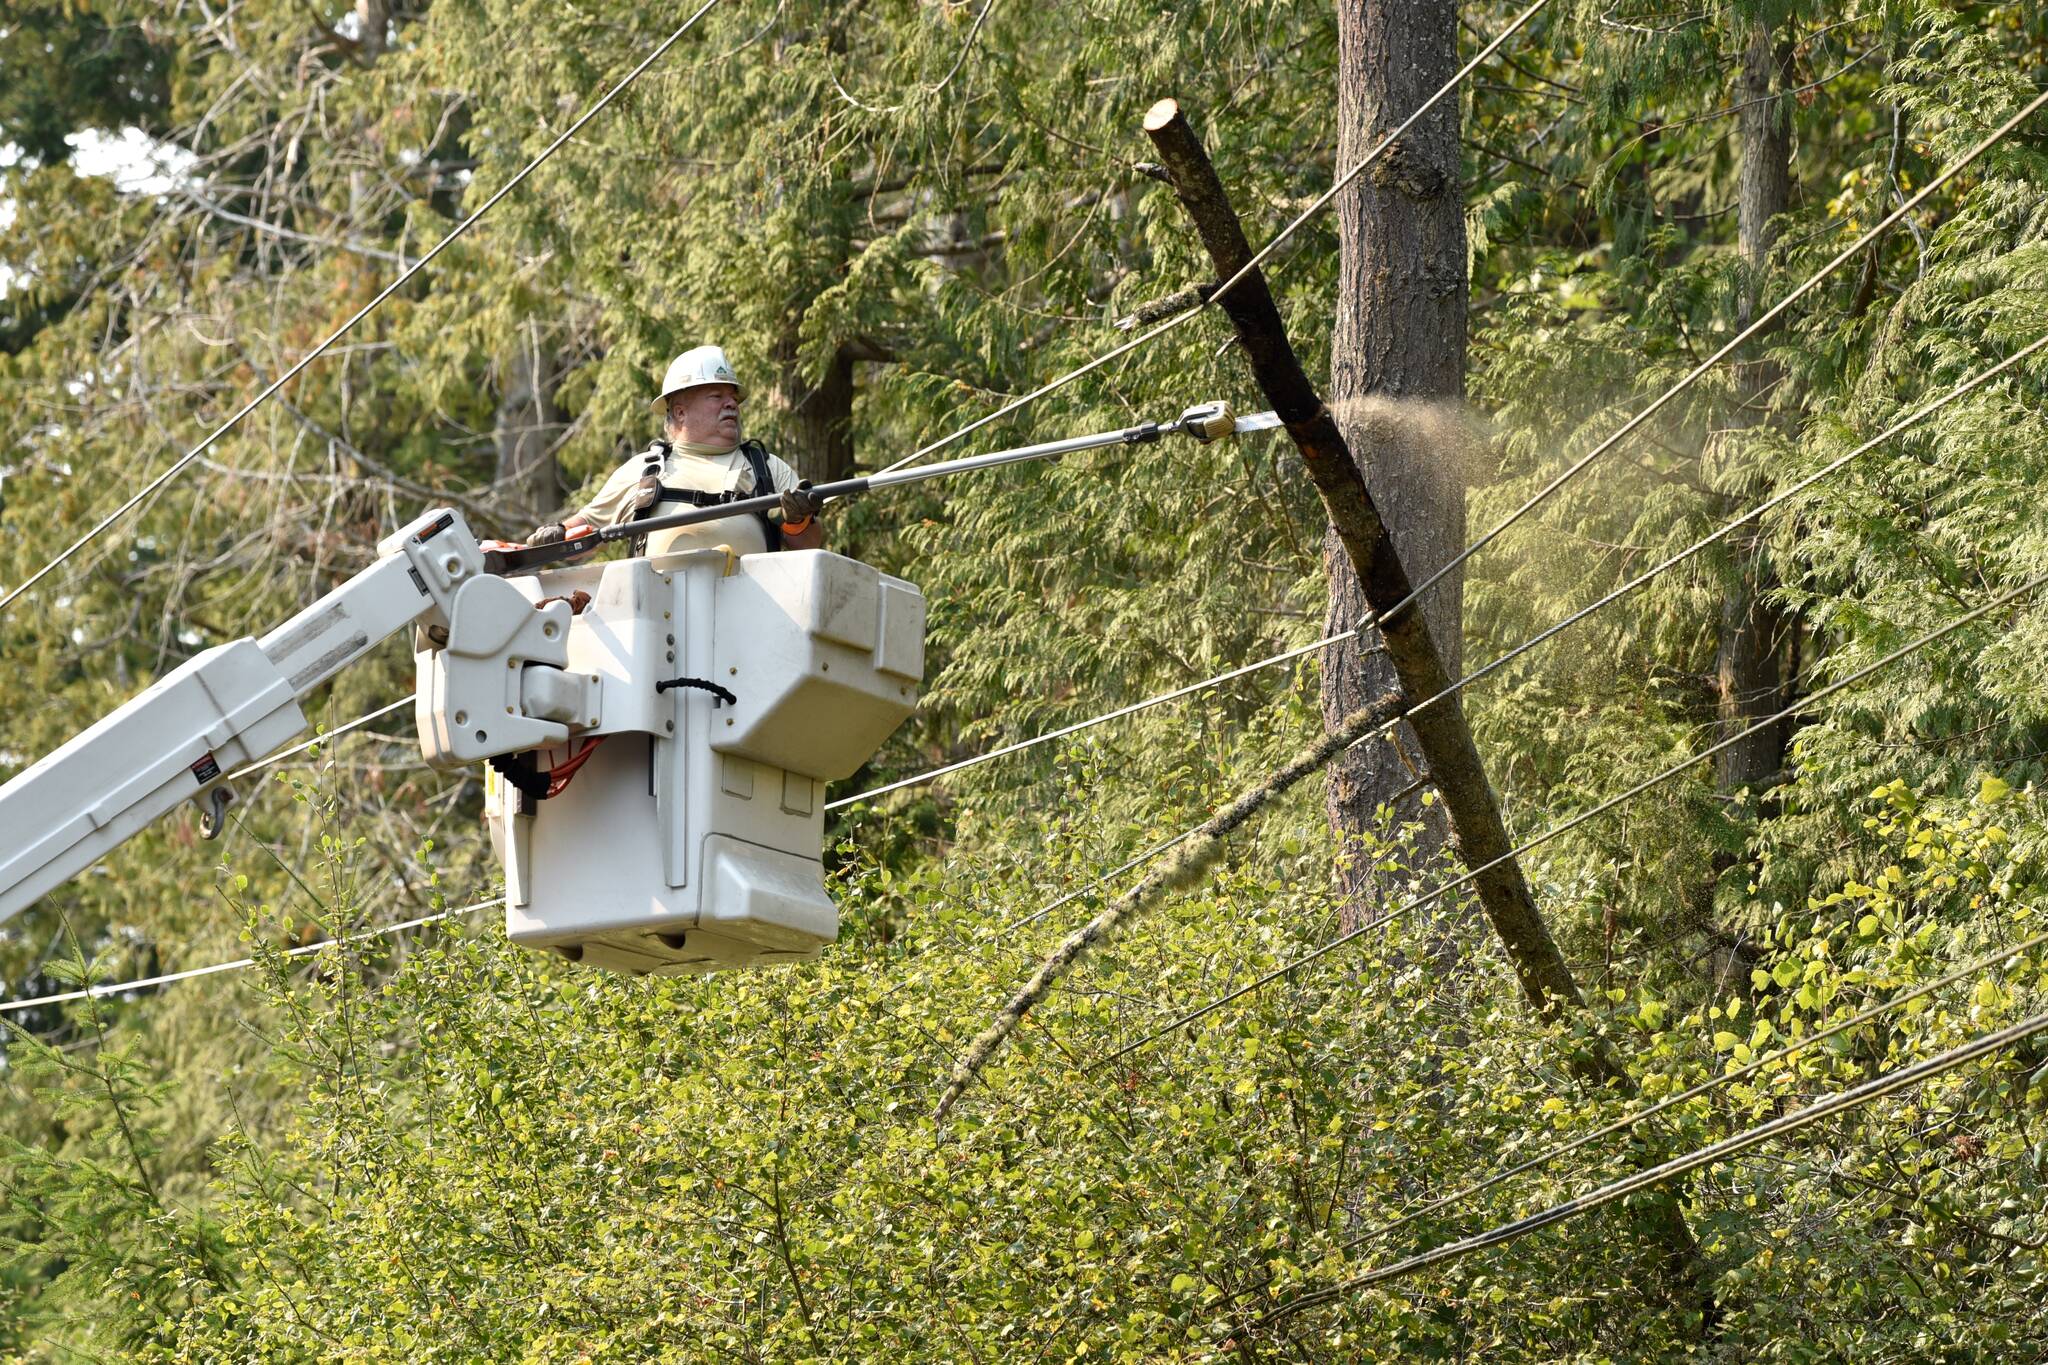 A Puget Sound Energy employee cuts a tree leaning on an electrical line that ignited dry lichen and dropped clumps of flaming debris on dry brush that started a fire.